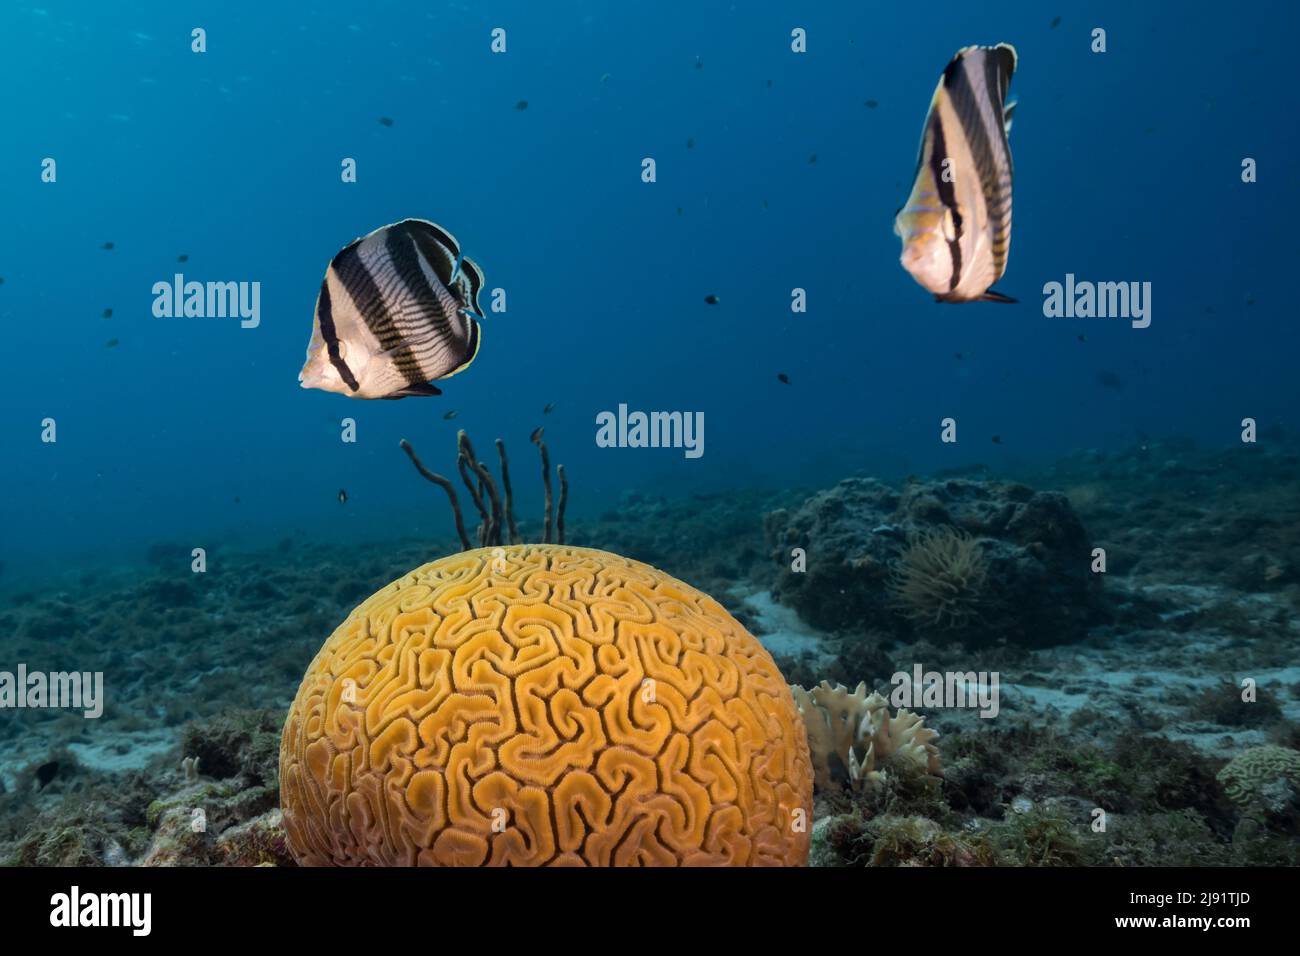 Seascape with Banded Butterflyfish while spawning of Grooved Brain Coral in coral reef of Caribbean Sea, Curacao Stock Photo